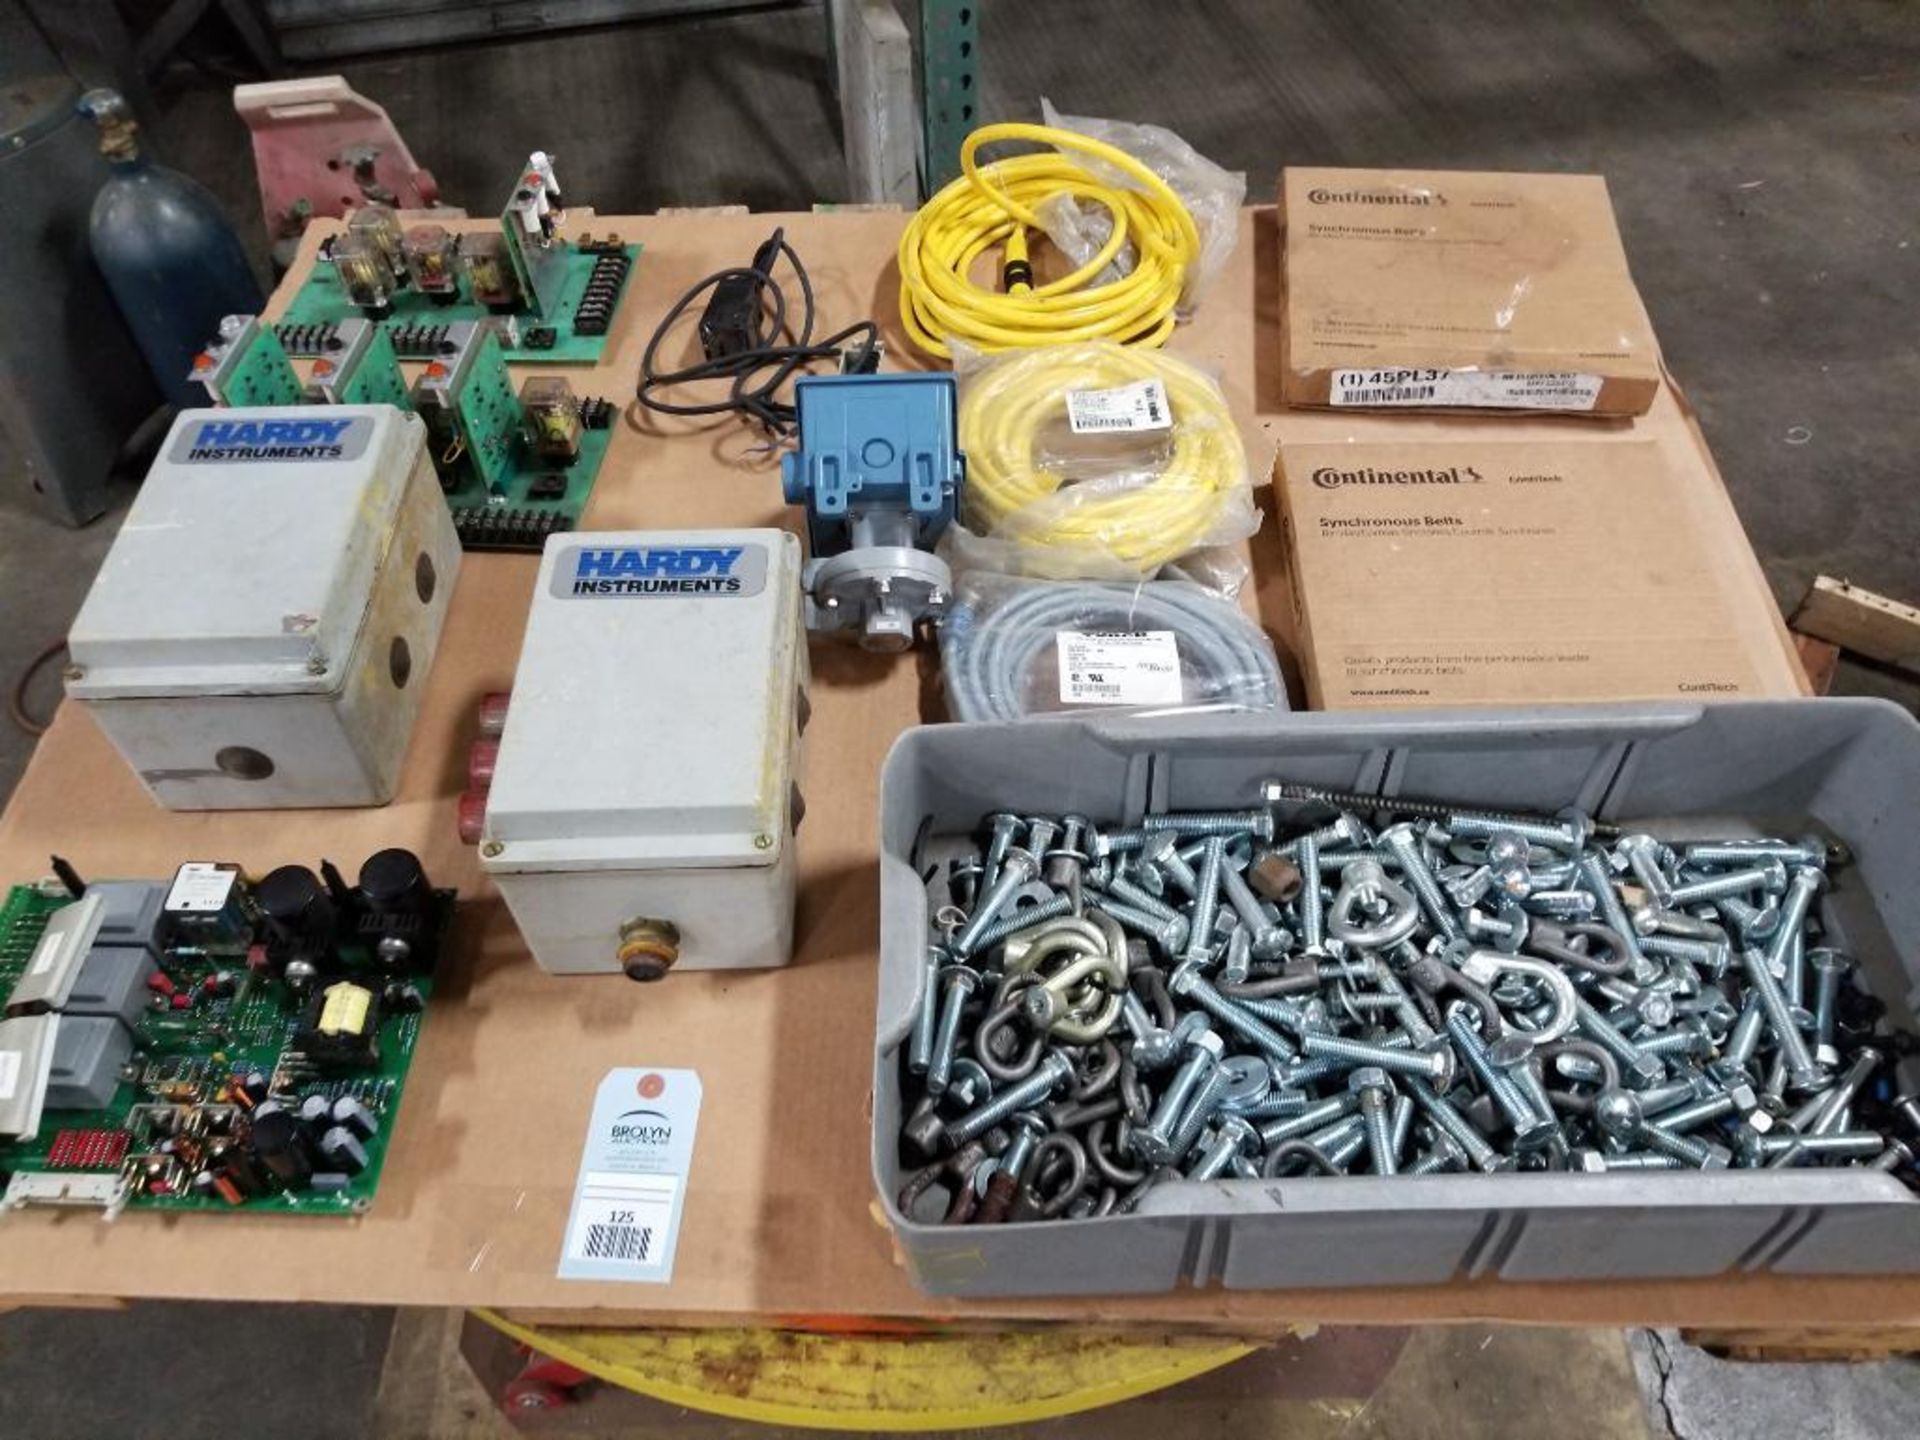 Pallet of assorted electrical and hardware. Continentals, Hardy Instruments, Brad Connectivity.